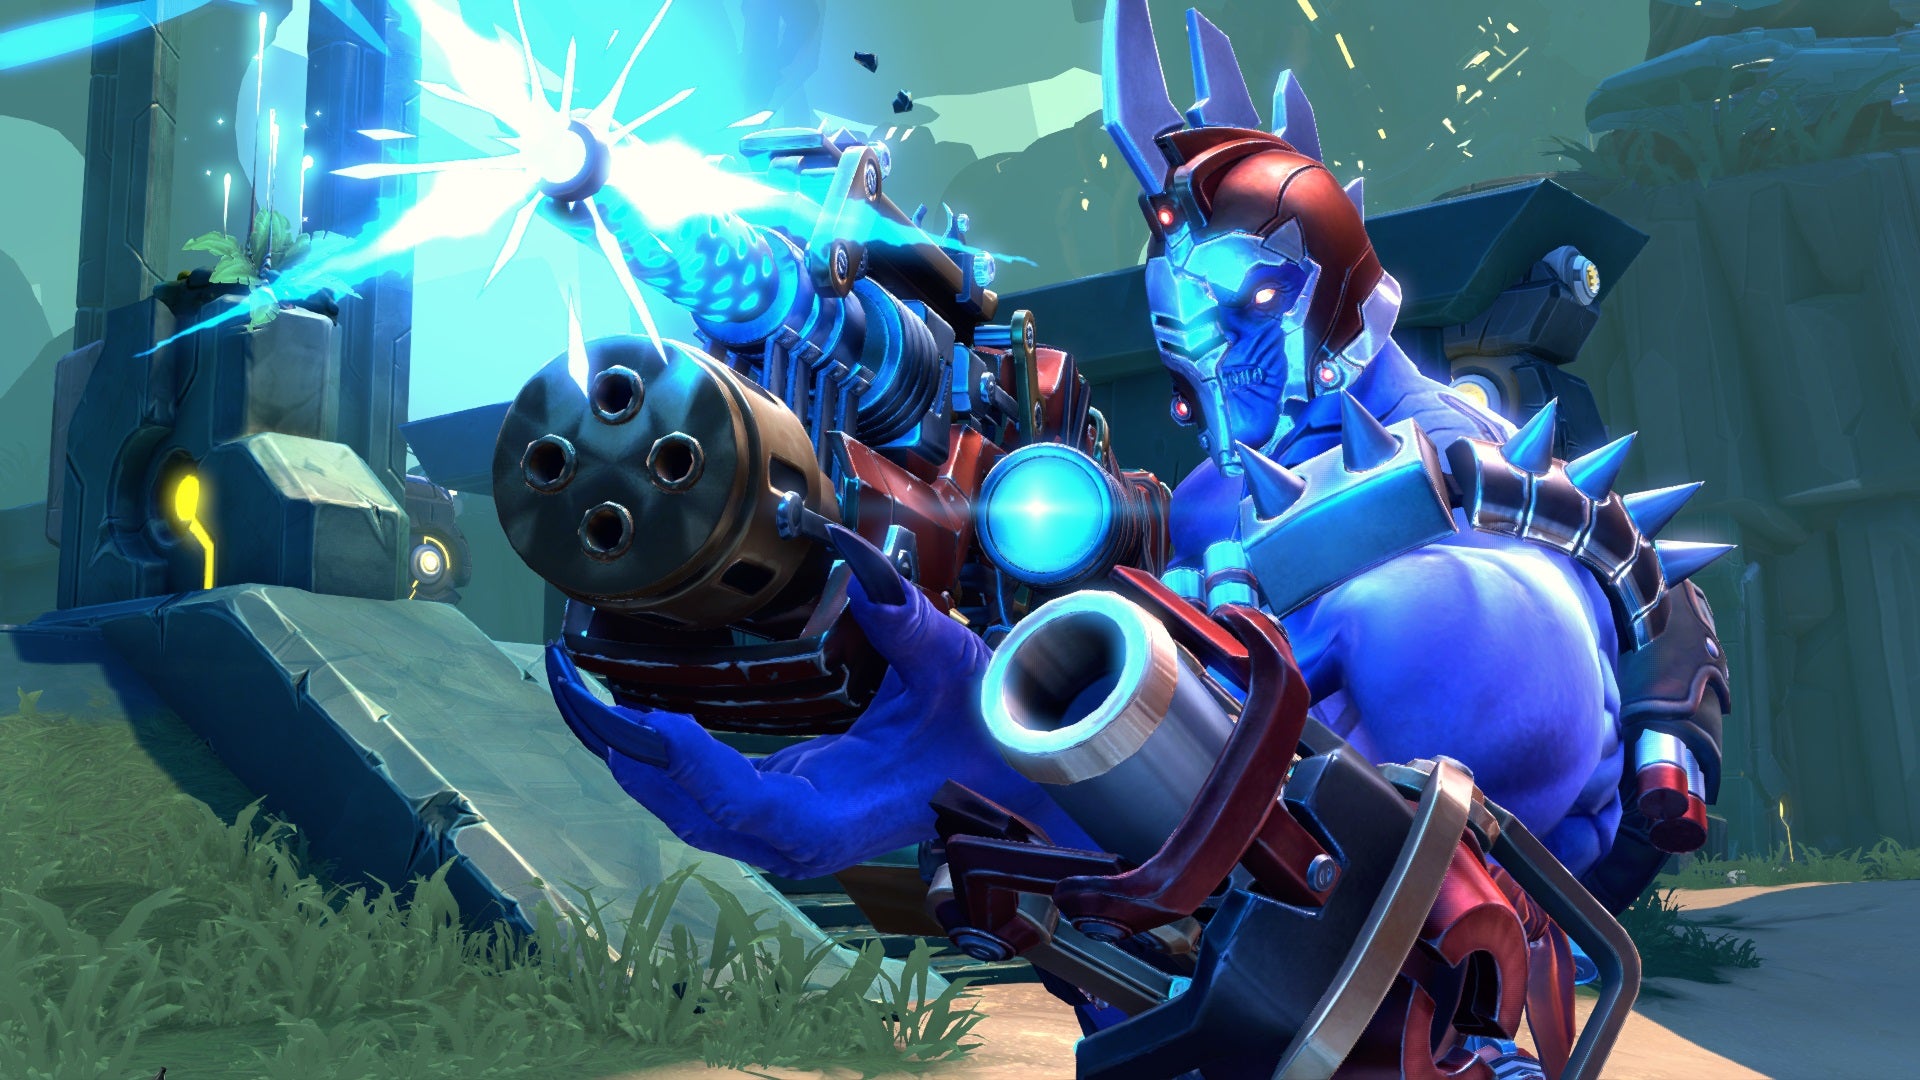 Image for Battleborn sales already "tracking just ahead" of Borderlands at launch